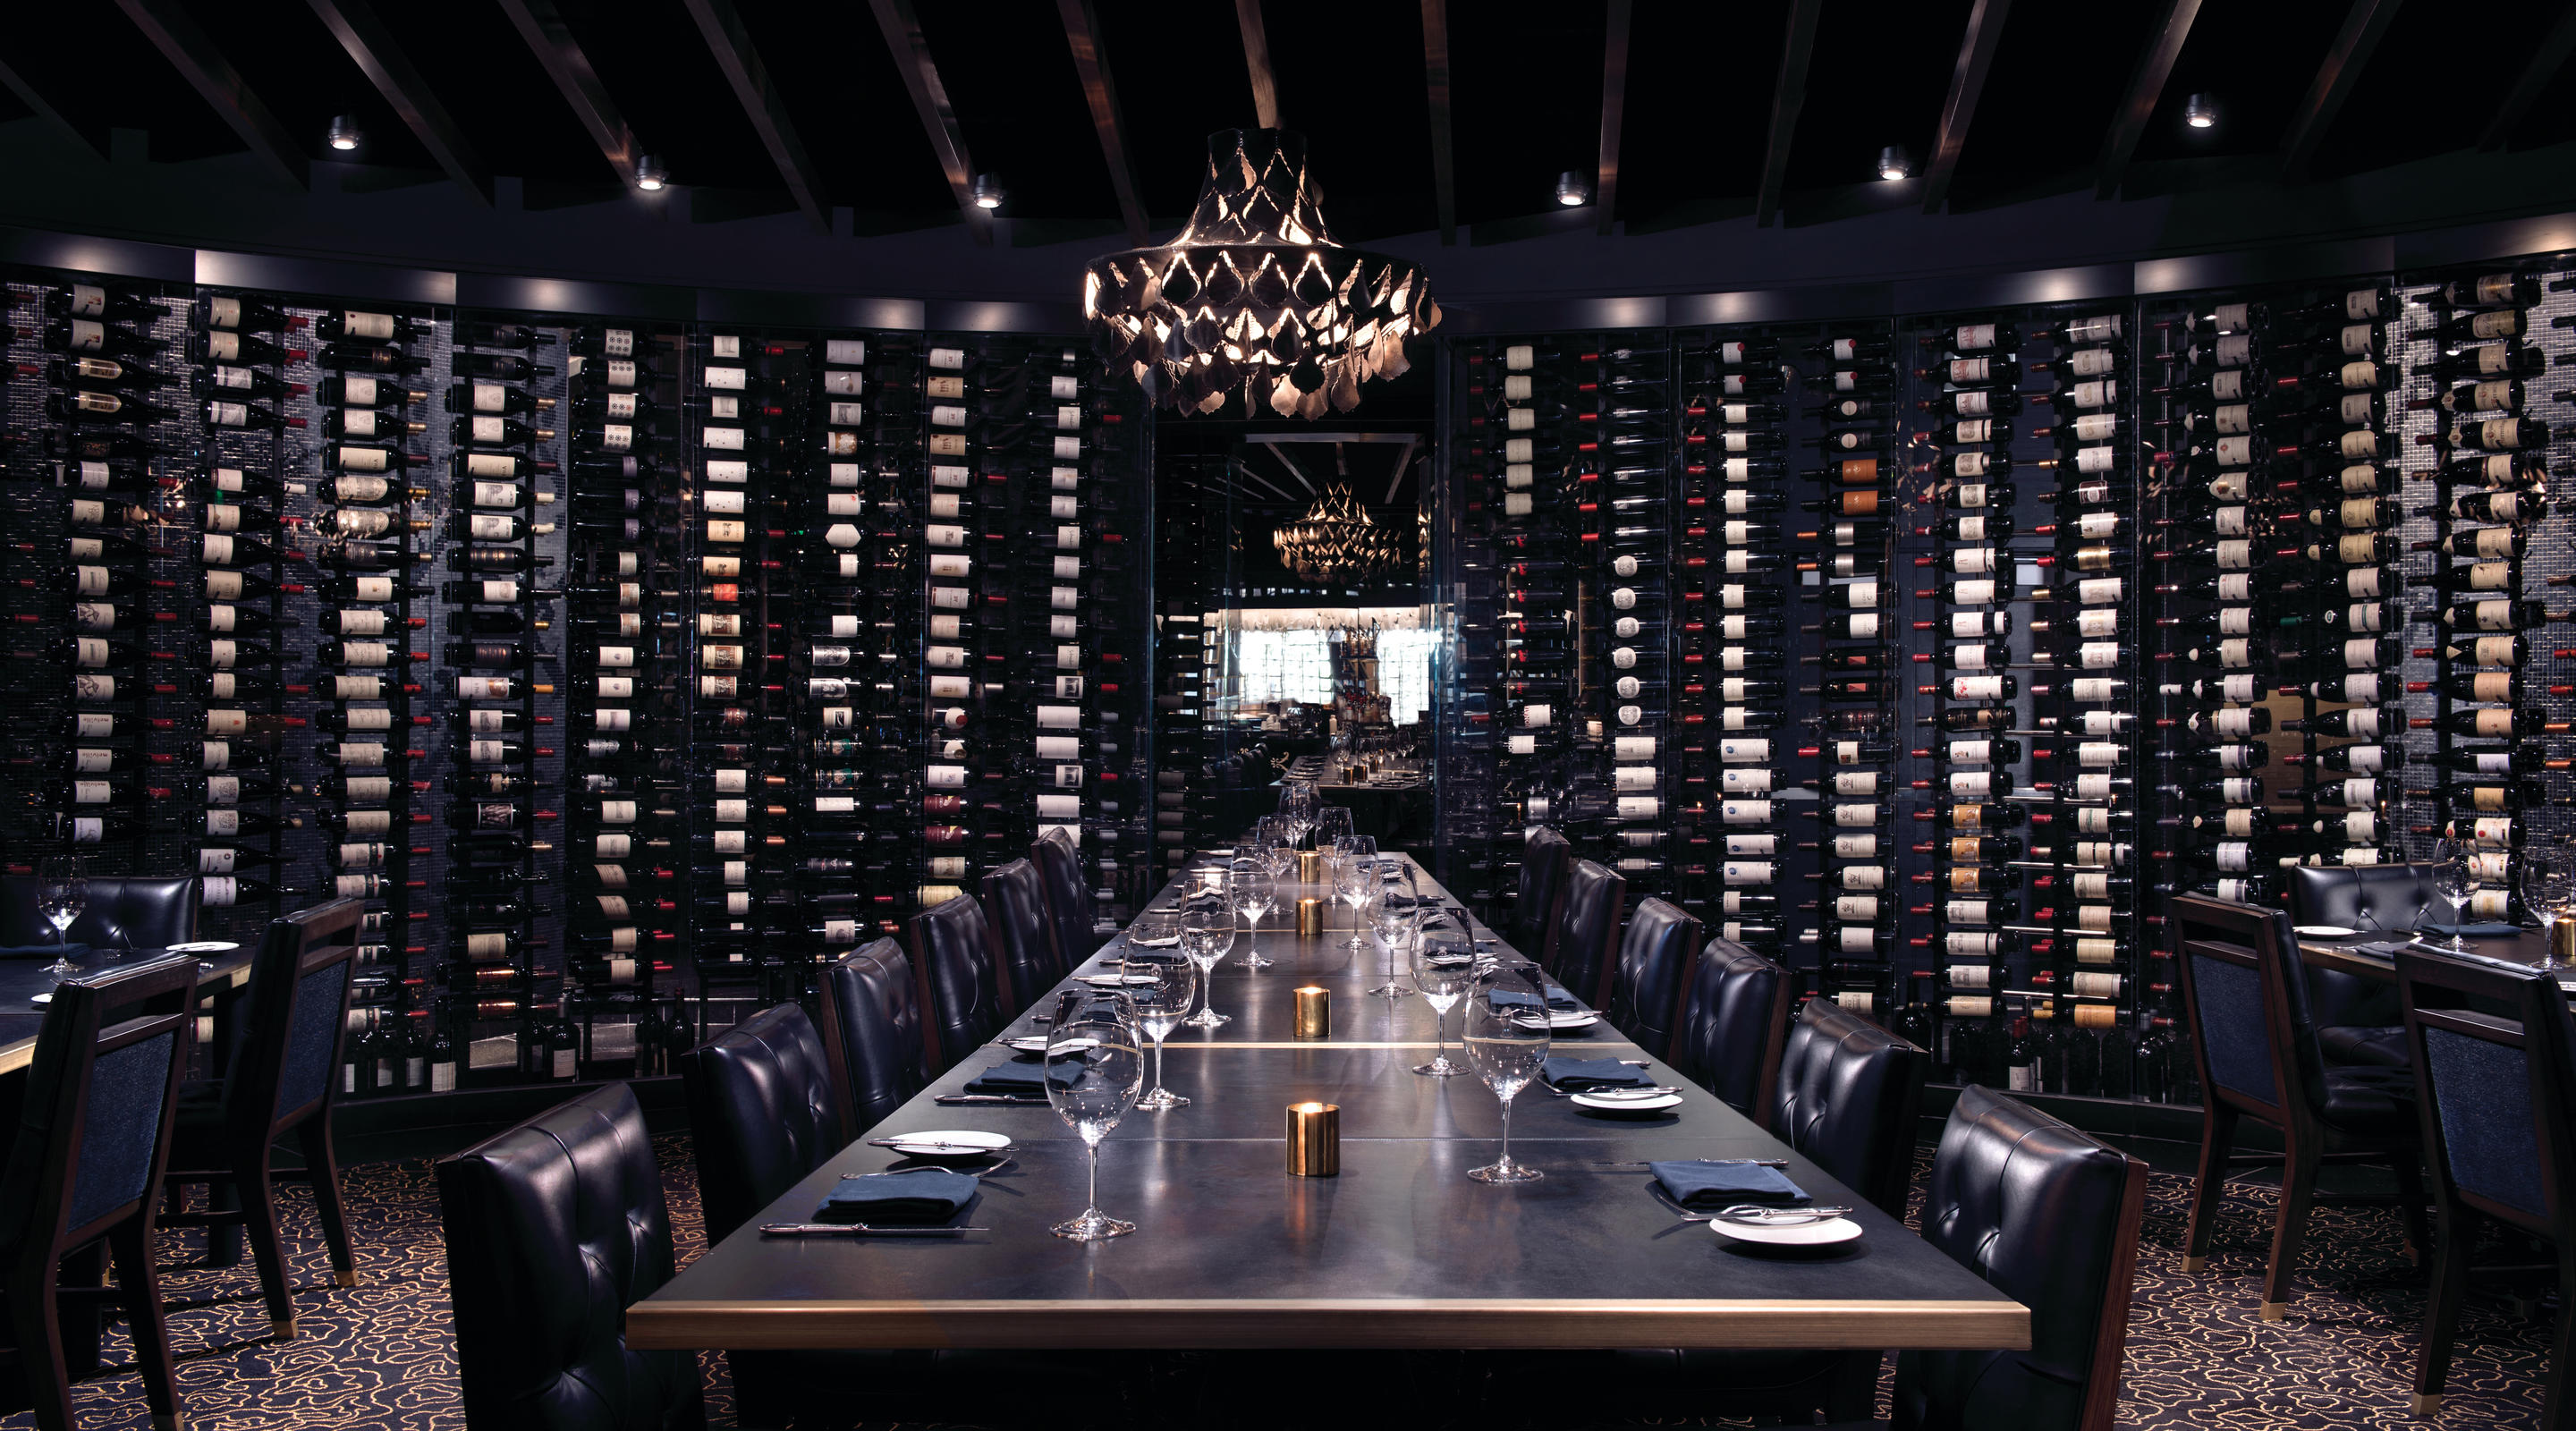 A wine alcove within a private dining room at Jean Georges Steakhouse.